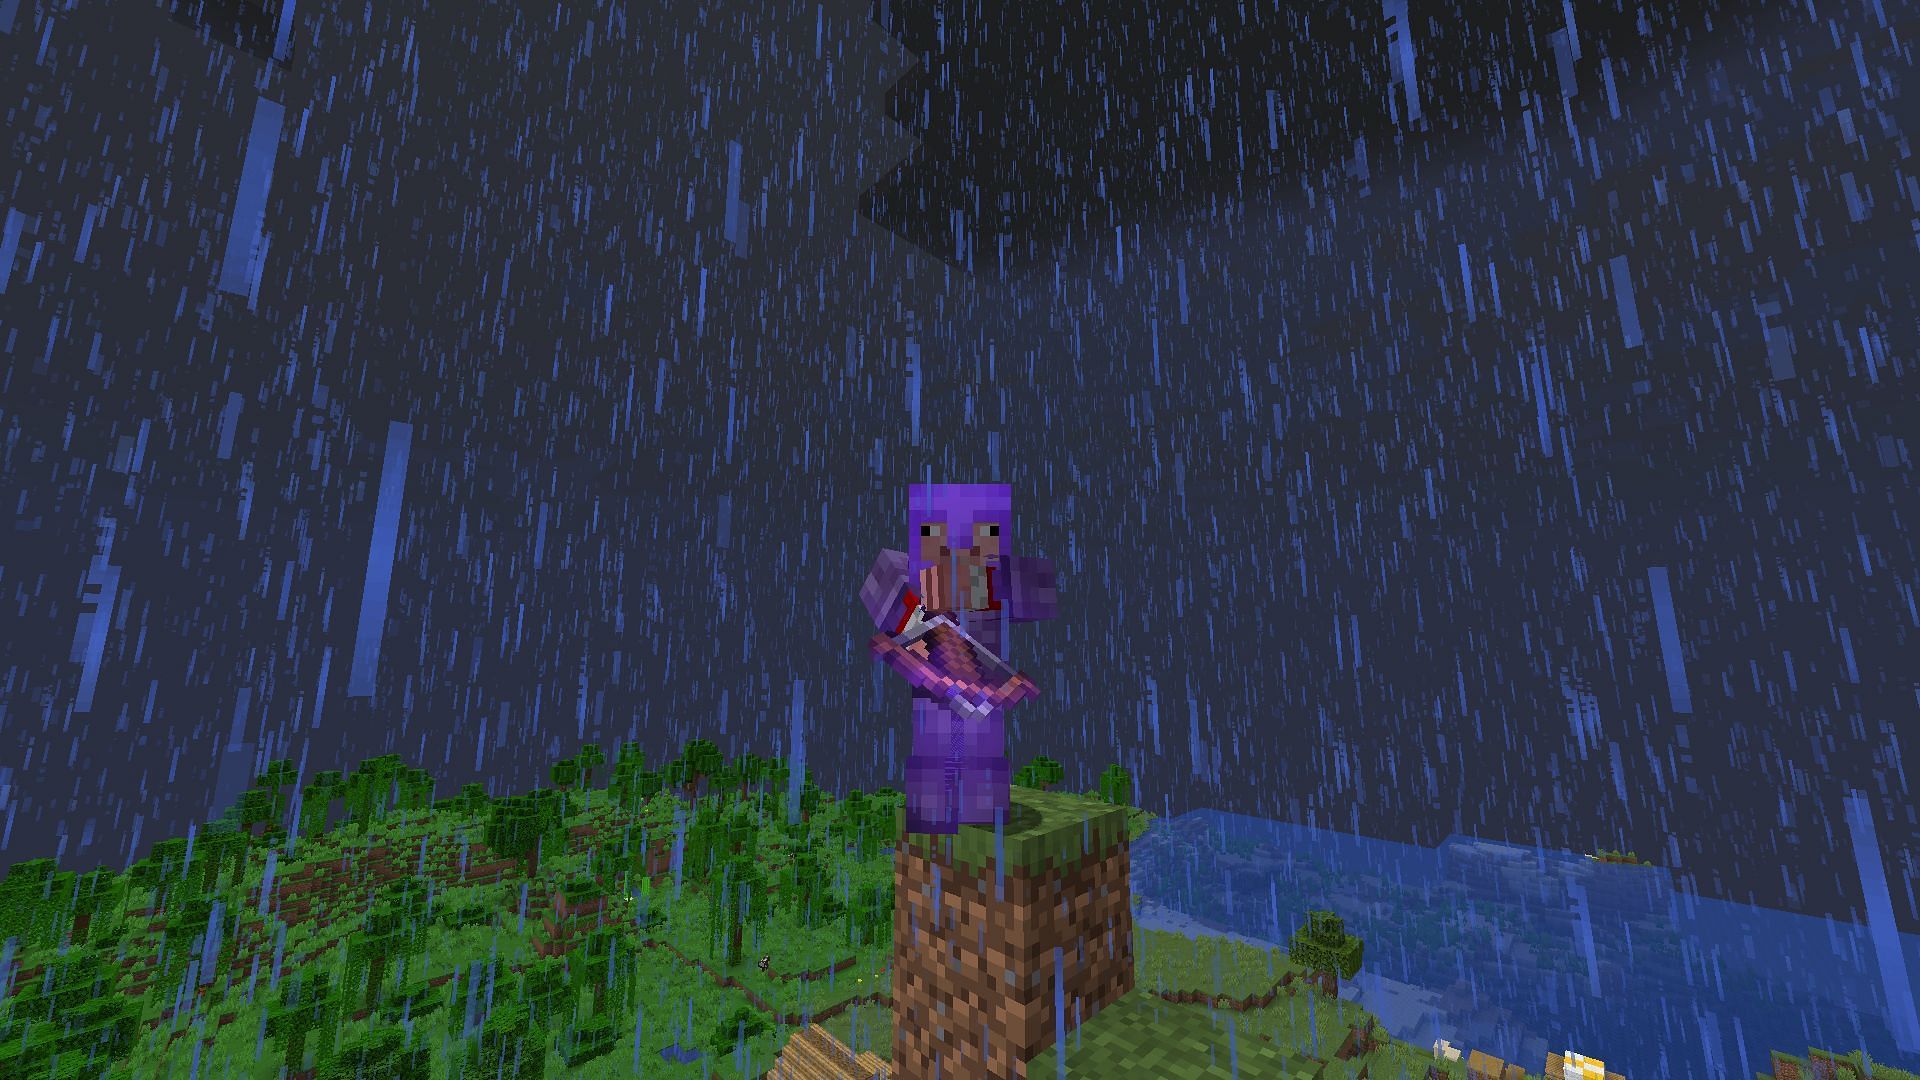 Weather pattern can be updated, bringing seasons to Minecraft (Image via Mojang)